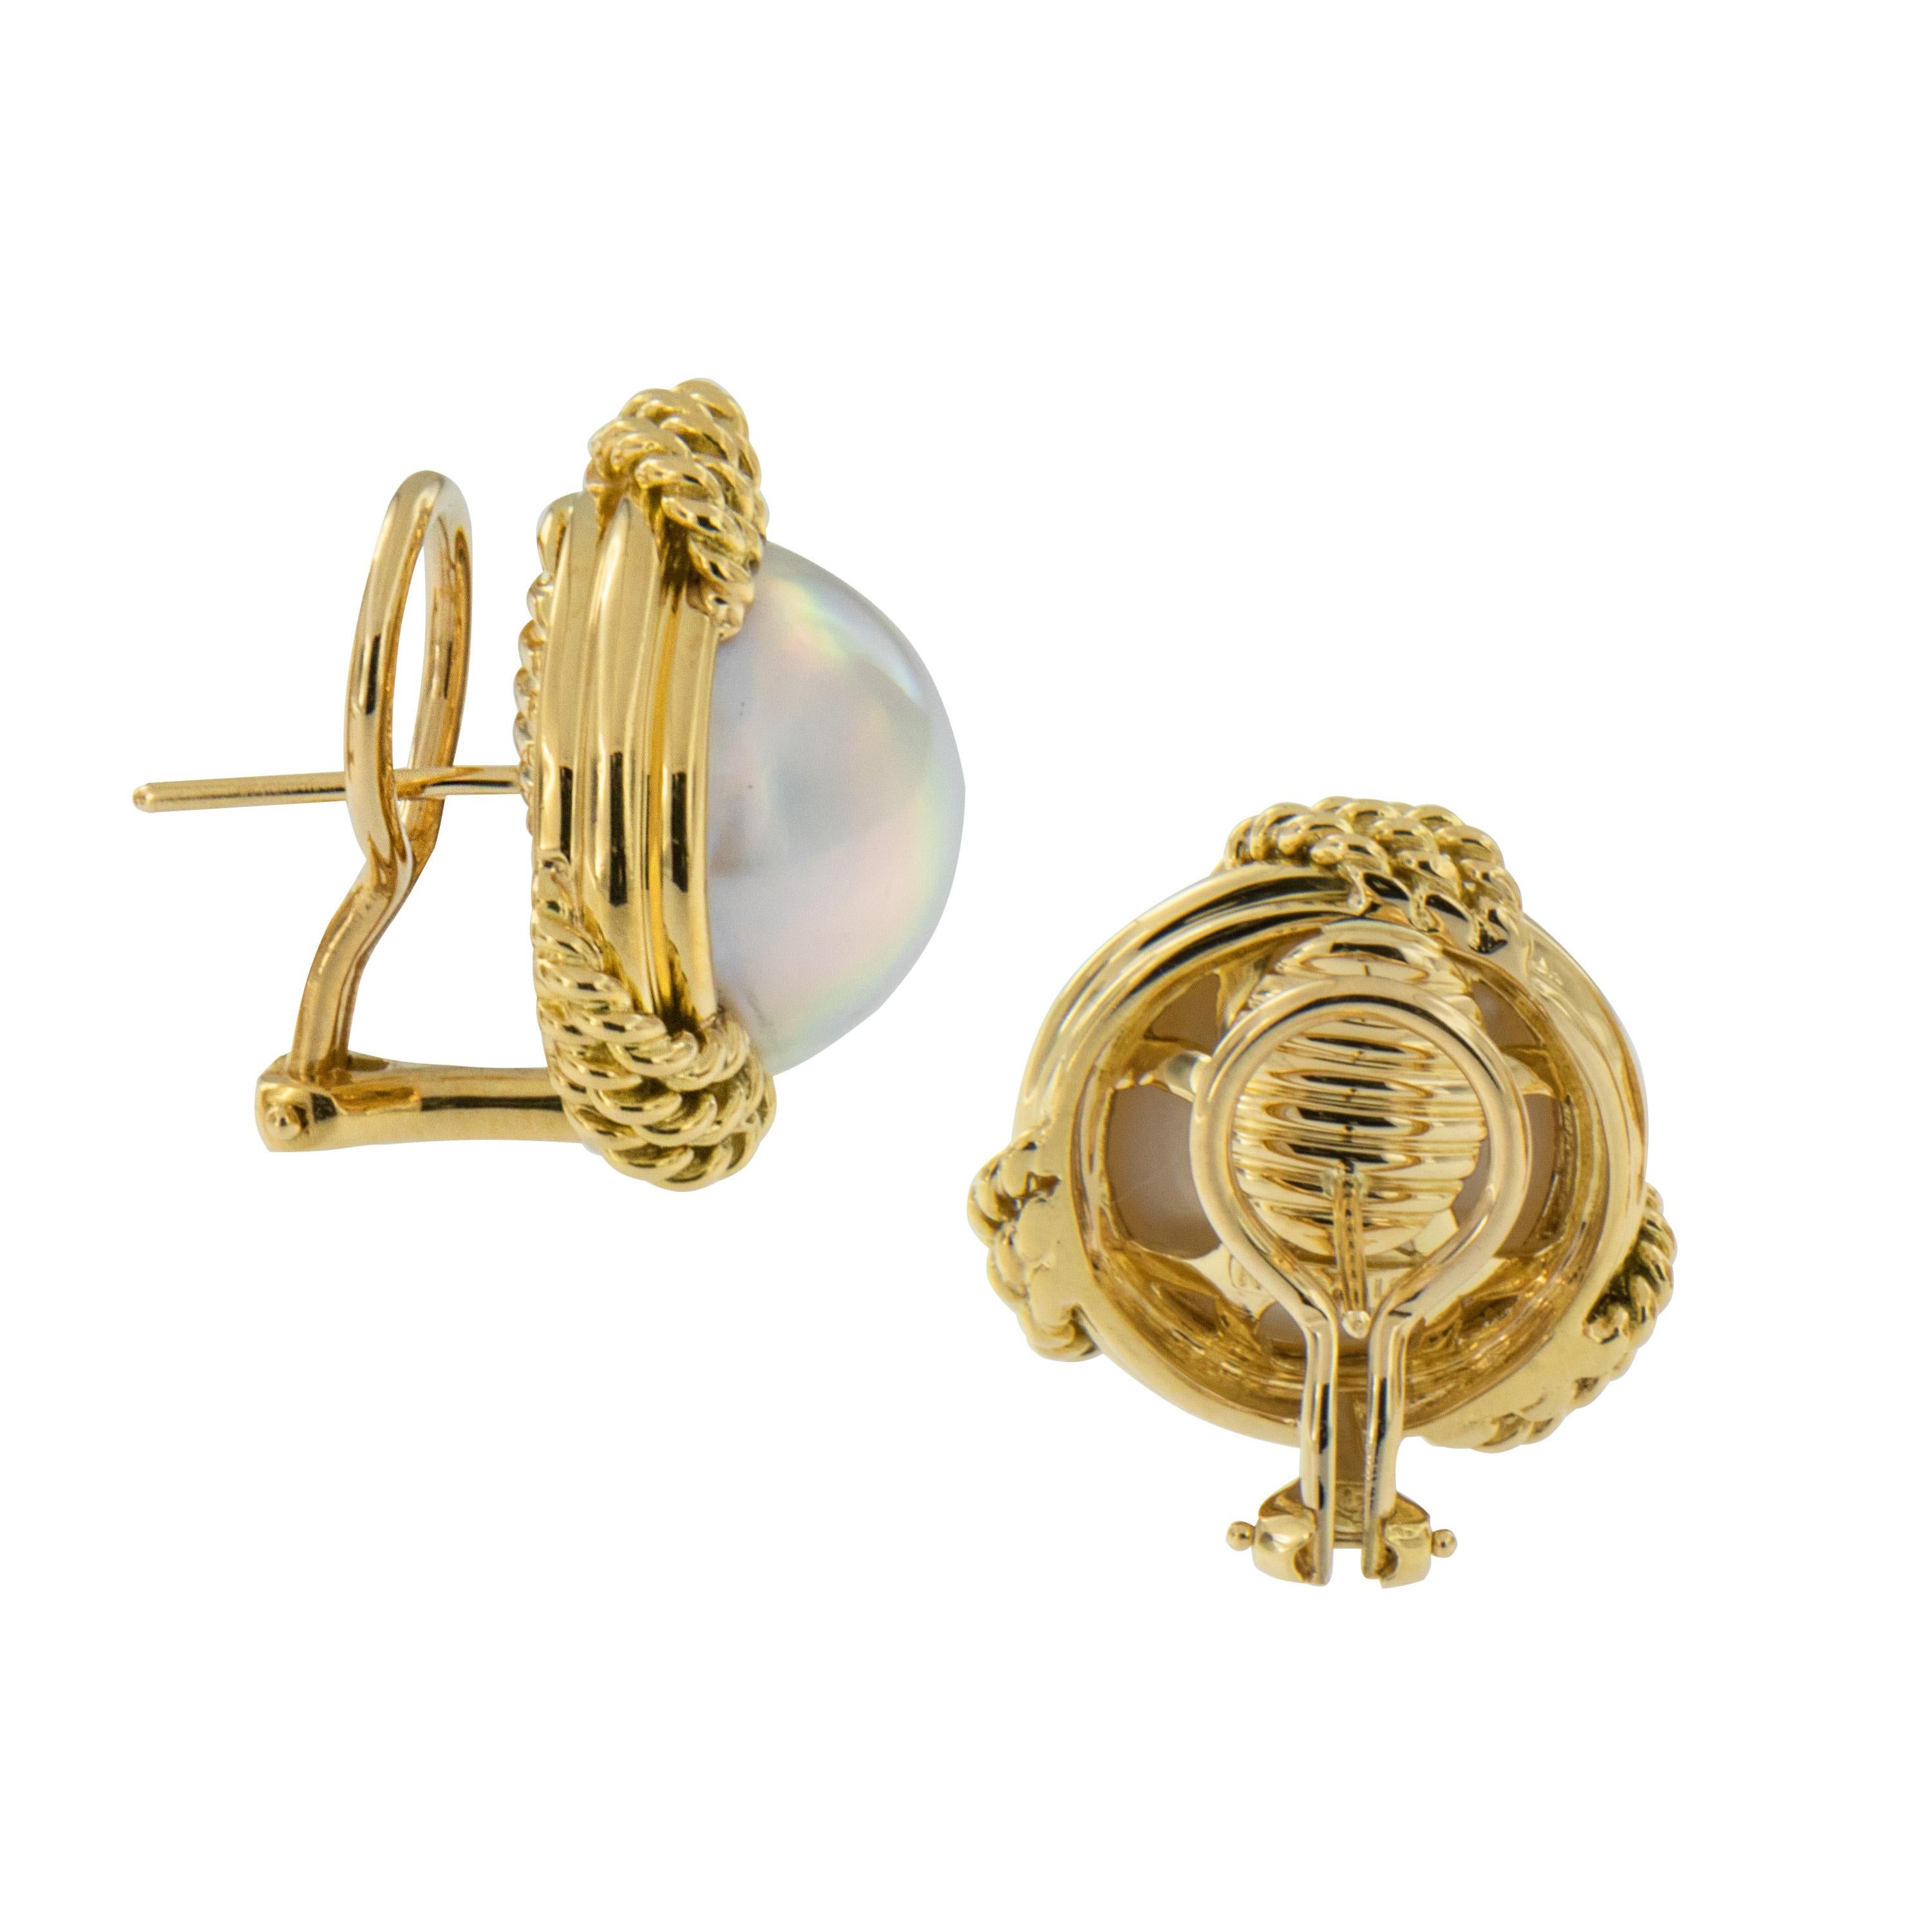 Pearls on the half shell by renowned designer & cultured pearl father Mikimoto! A magnificent pair of signed Mikimoto earrings featuring 14mm mabe' pearls in 18K yellow gold twisted wire framework. These classic earrings look great with formal,